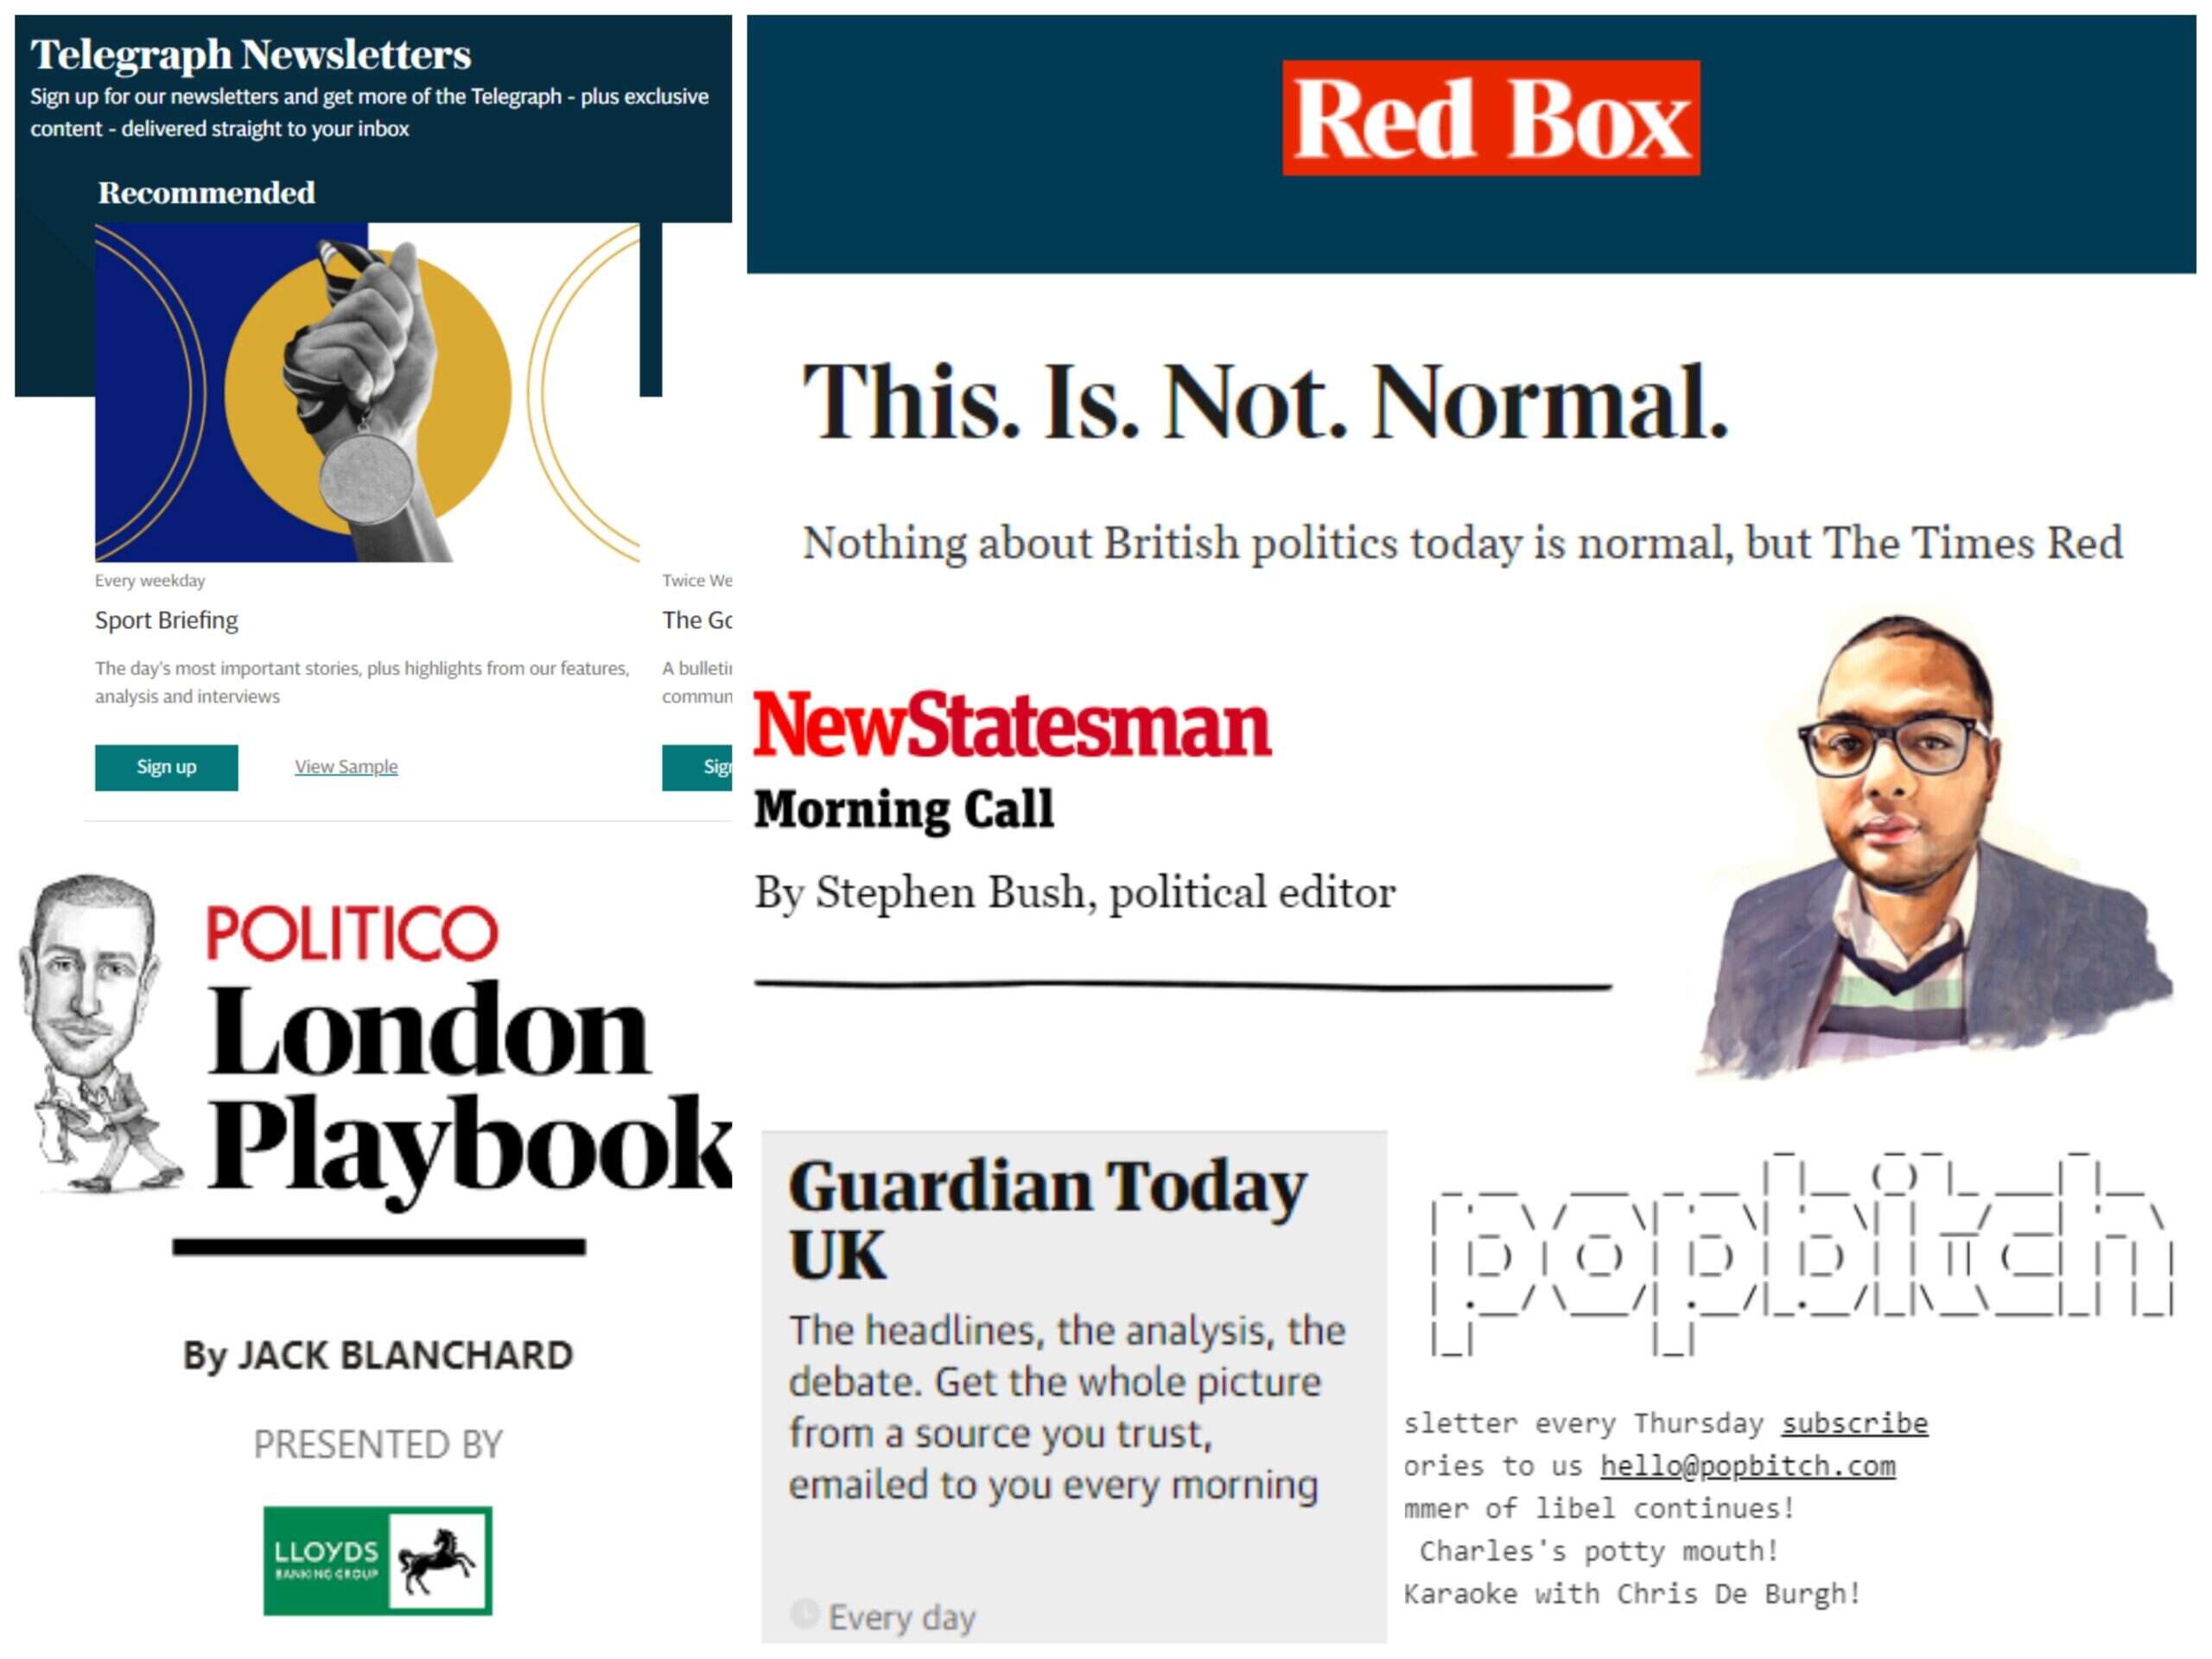 How low-tech email newsletters 'weathered the storm' to become vital part of UK media landscape